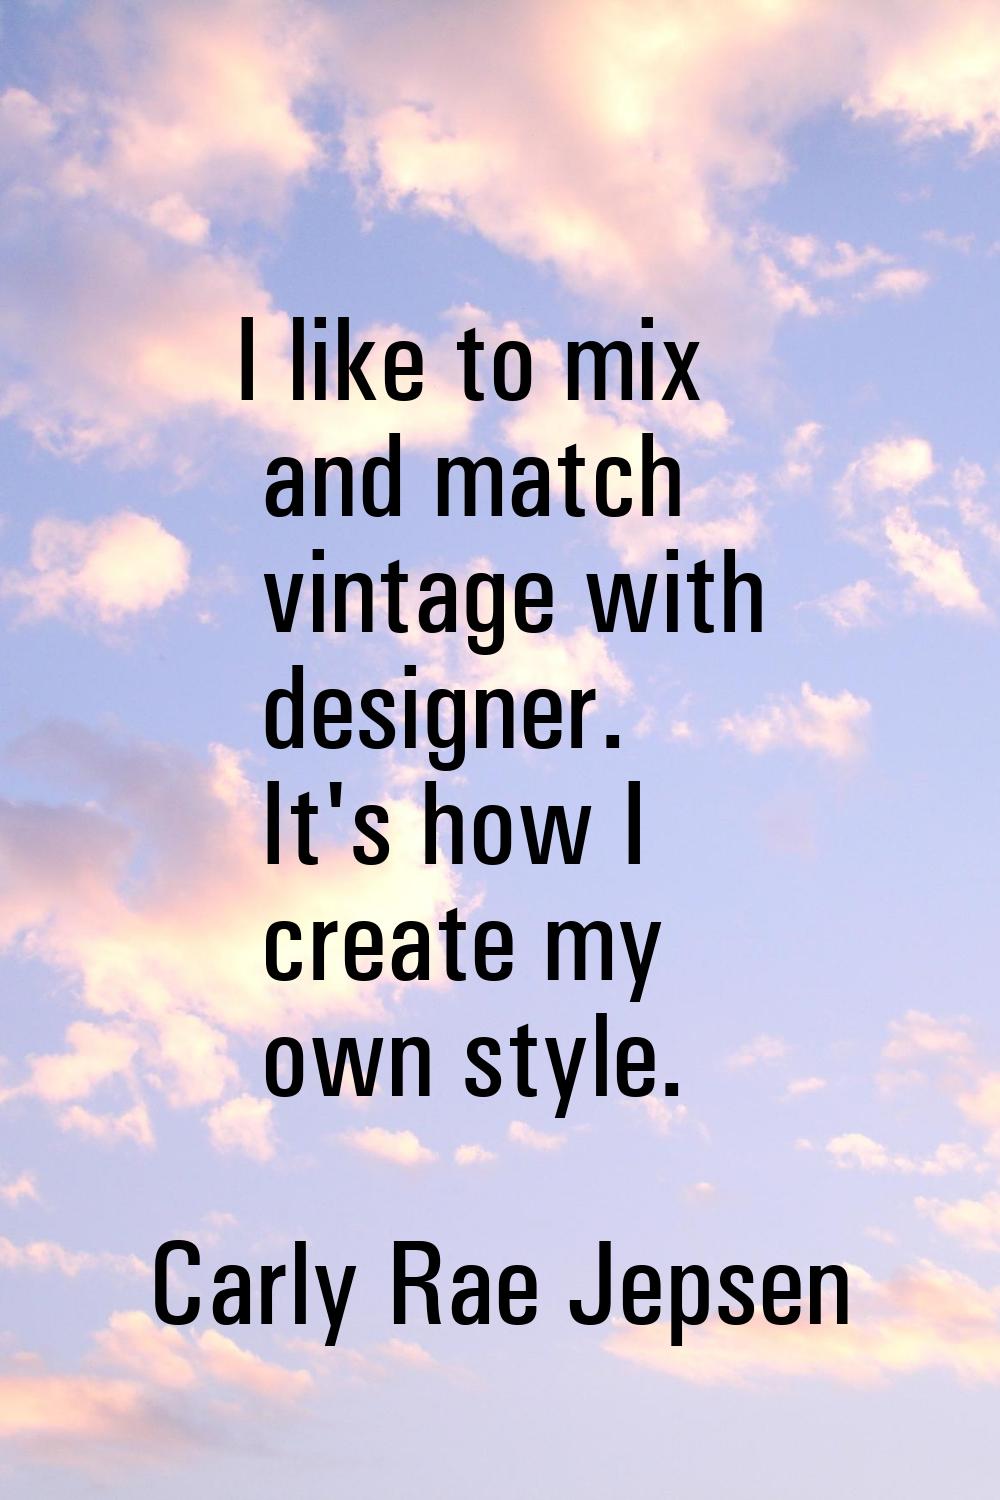 I like to mix and match vintage with designer. It's how I create my own style.